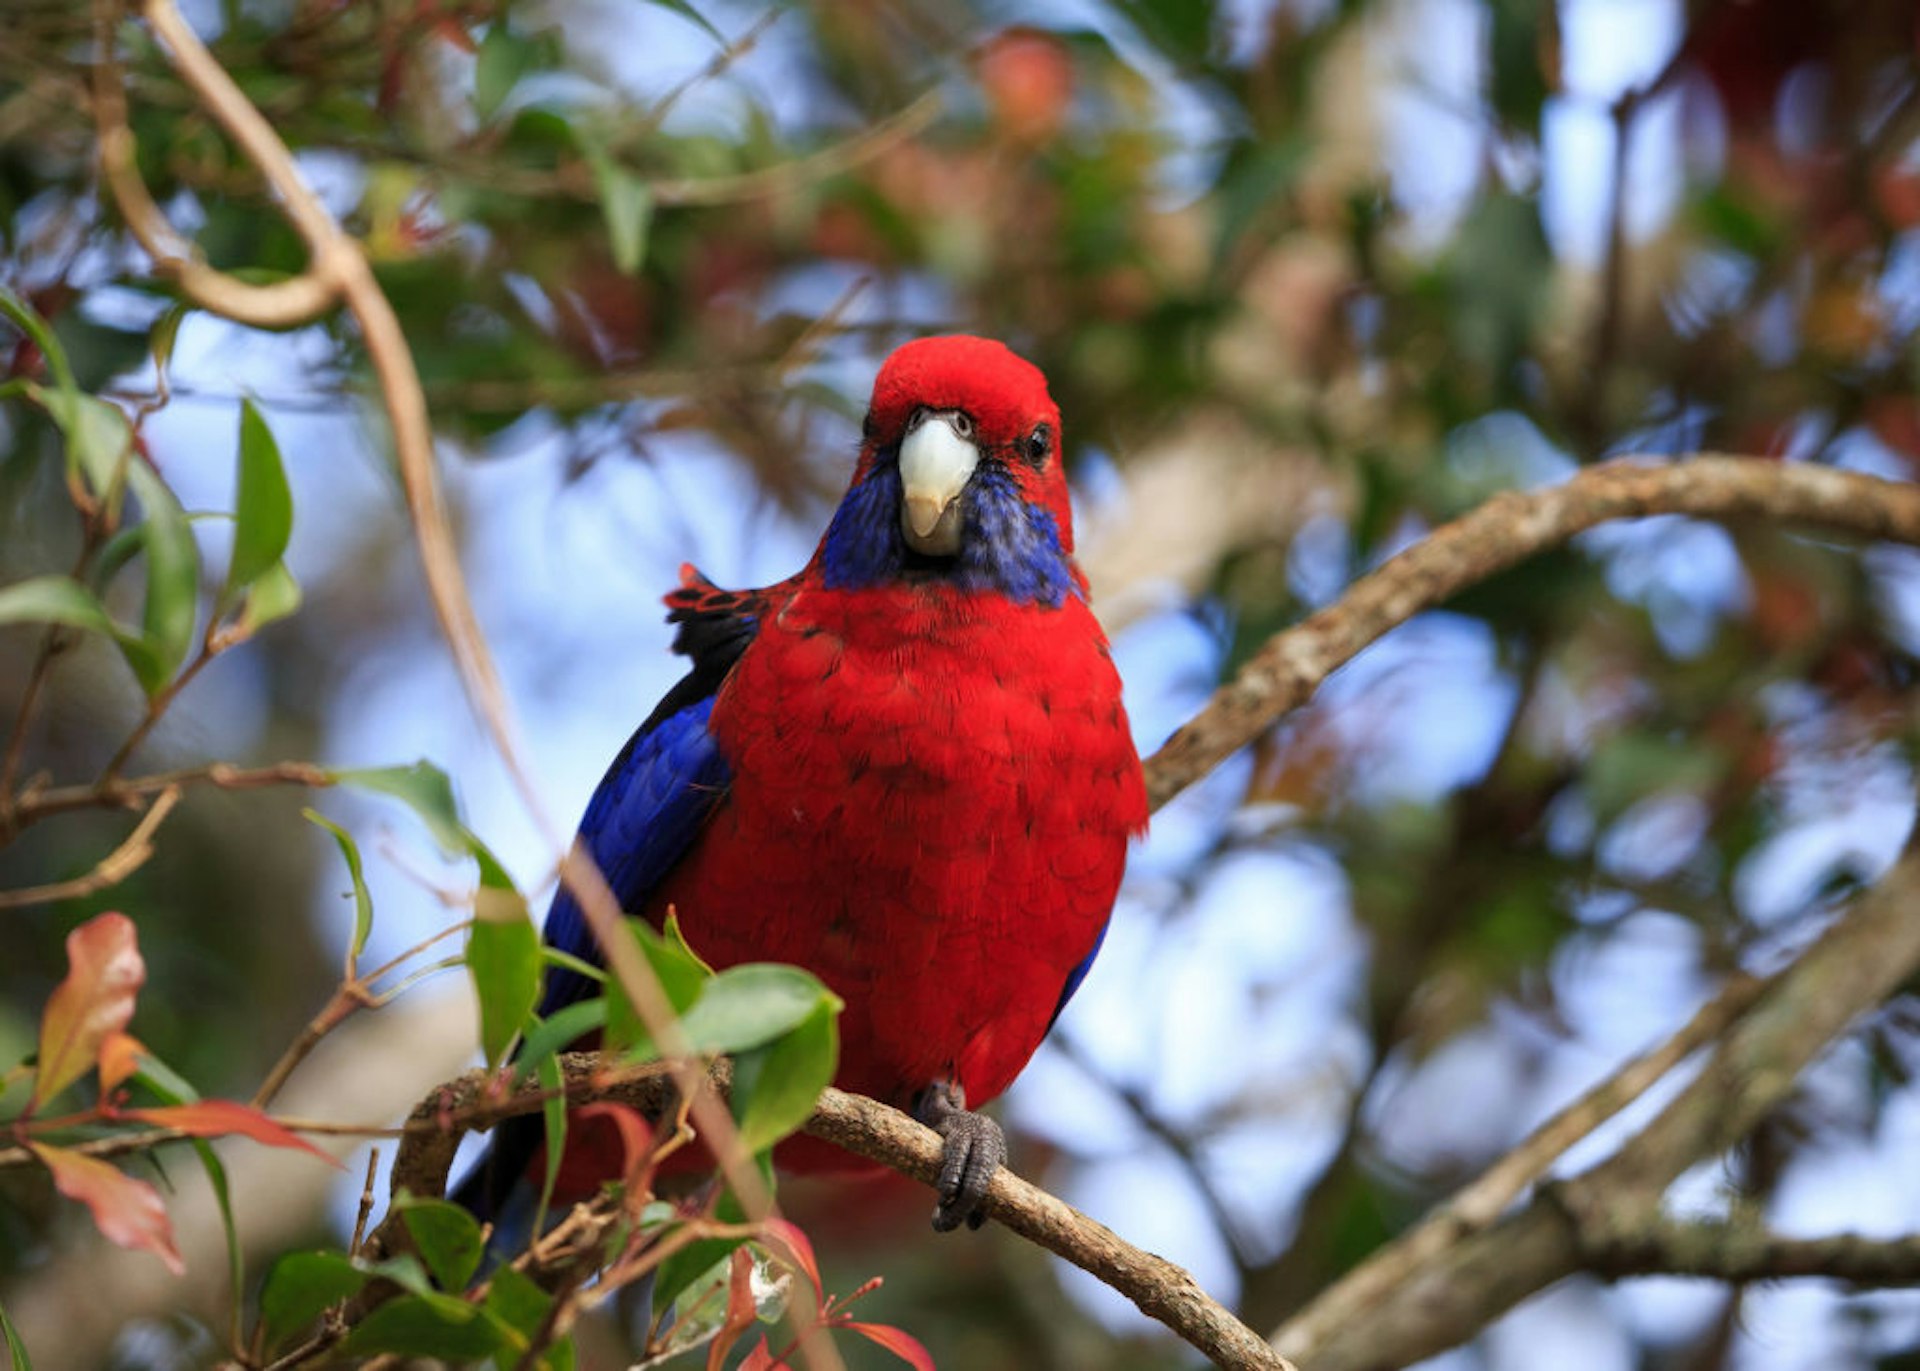 Crimson Rosella parrot in a tree in the Green Mountains in Lamington National Park